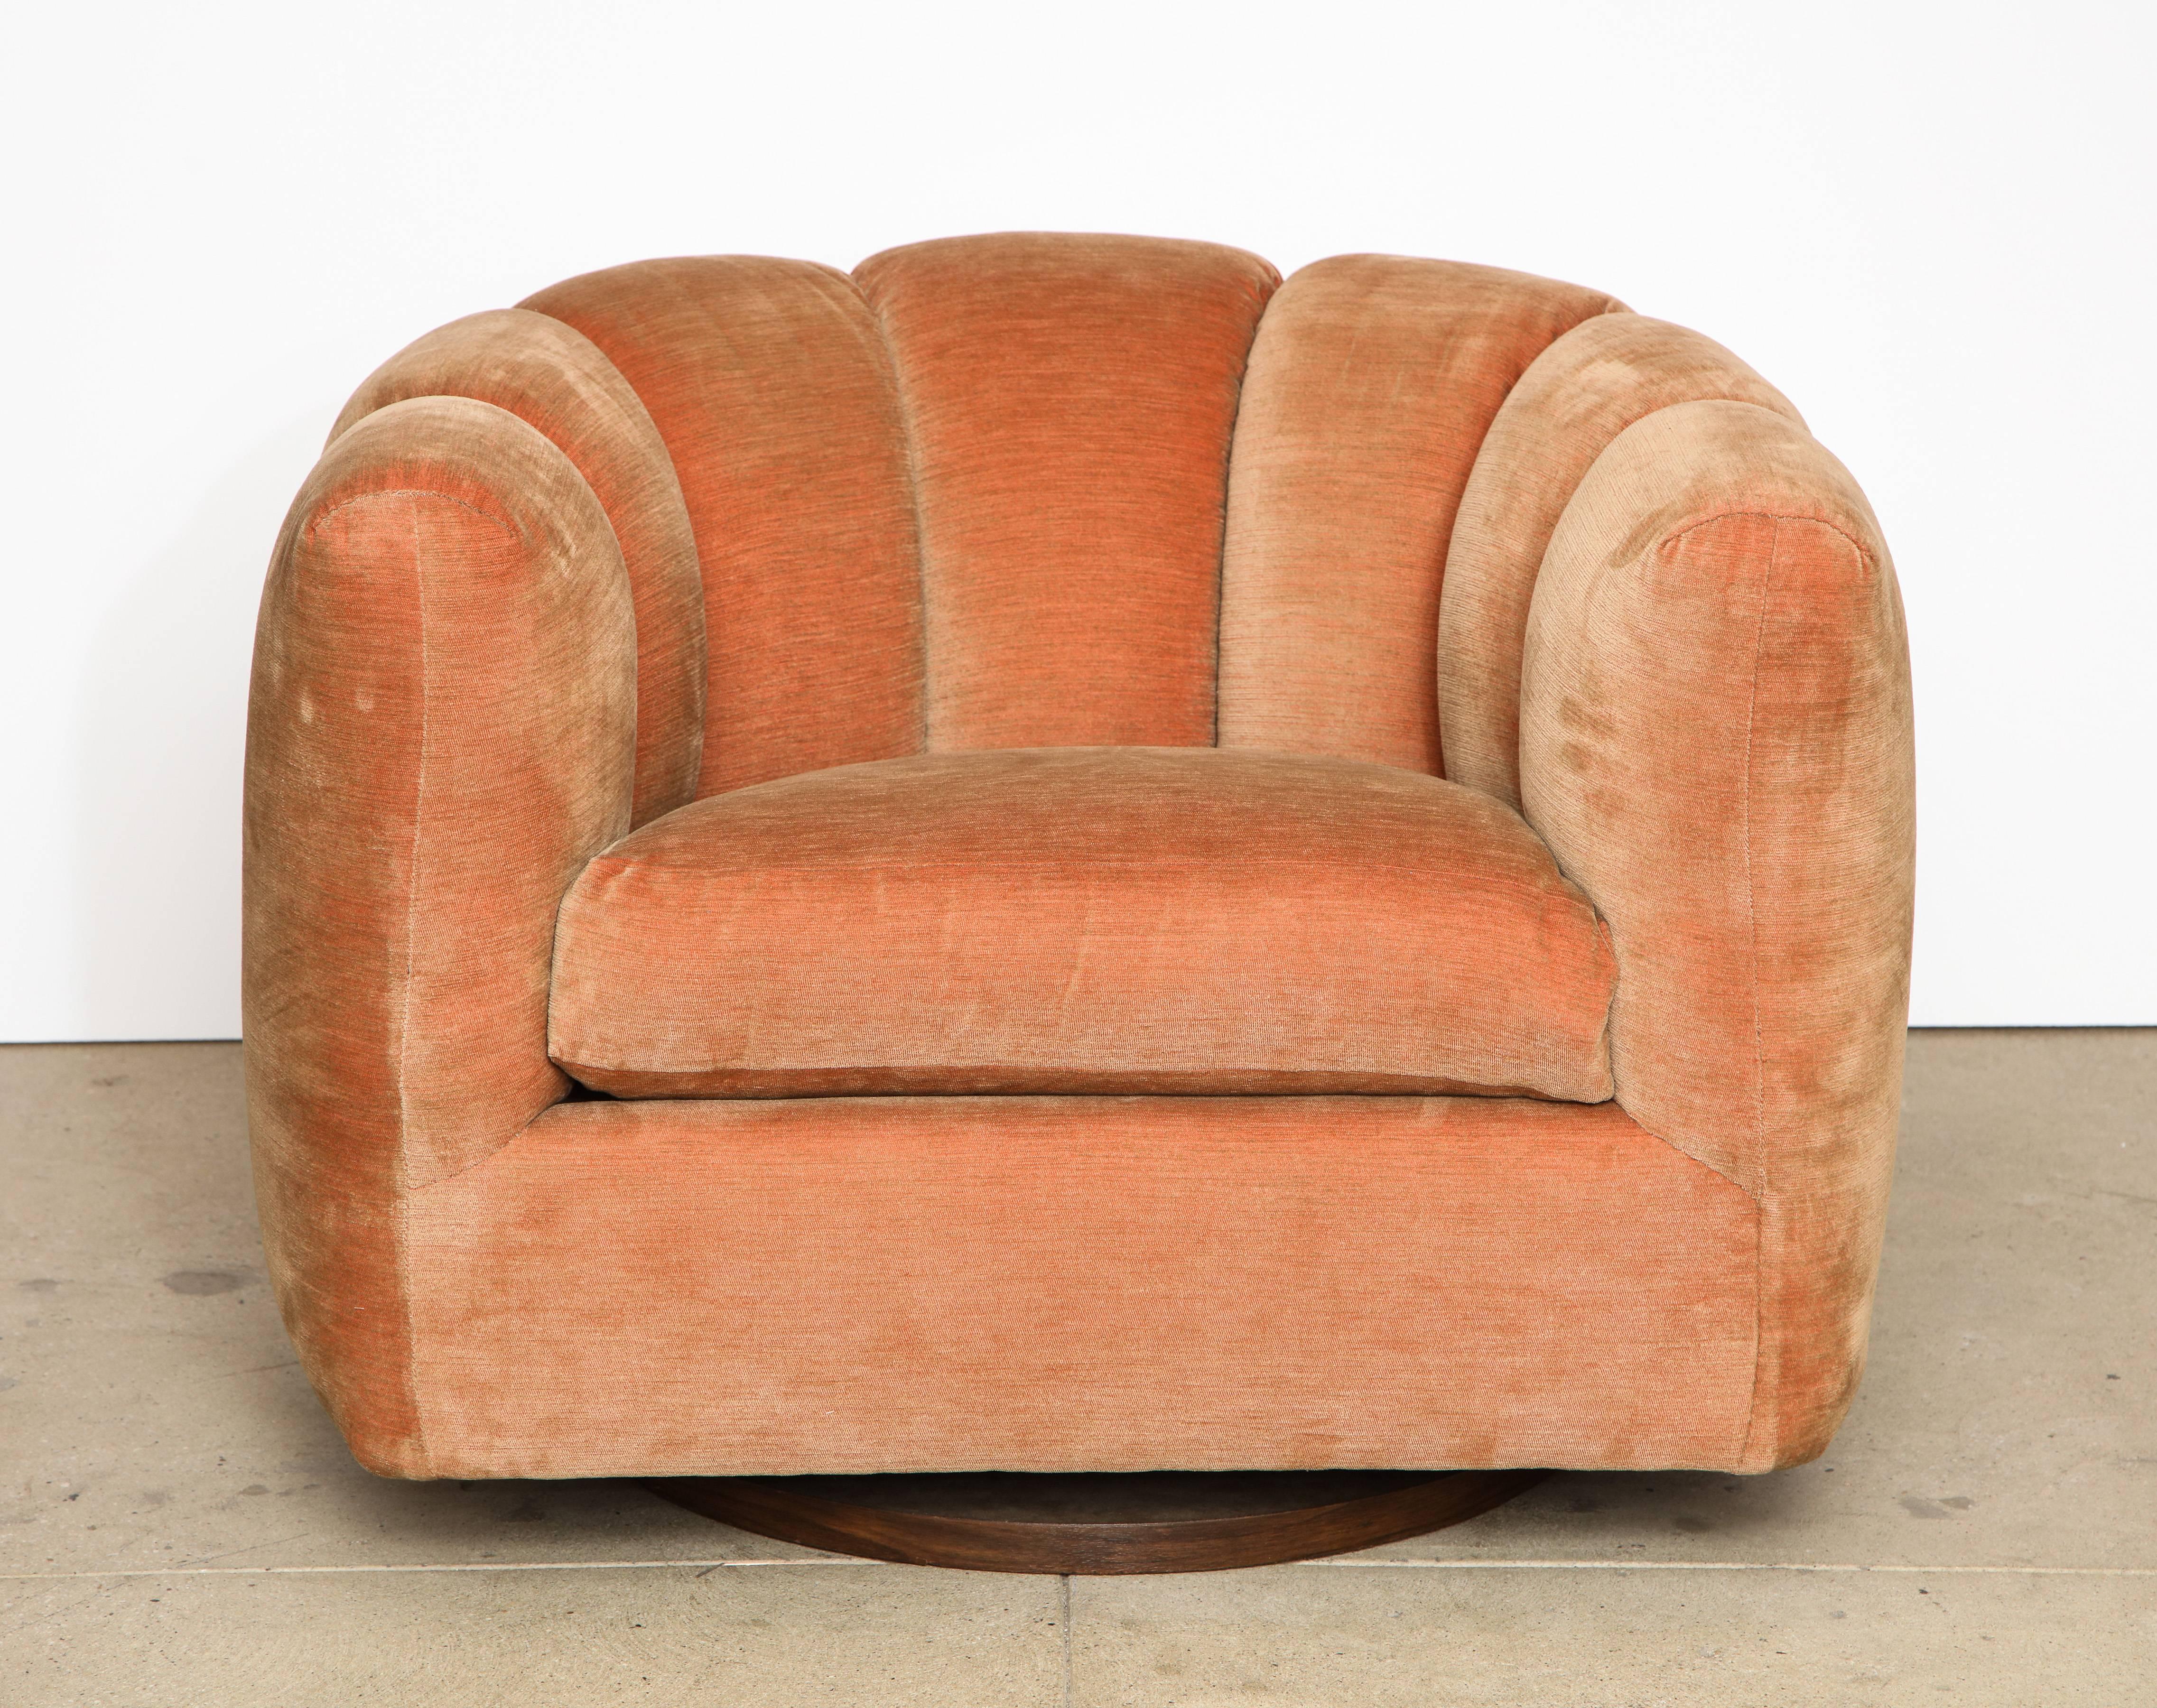 A pair of swivel armchairs with channel backs attributed to Milo Baughman, with their original peachy pink and brown velvet tufted upholstery; the tufting is finished all around. The upholstery is original and in excellent condition. Supported on a